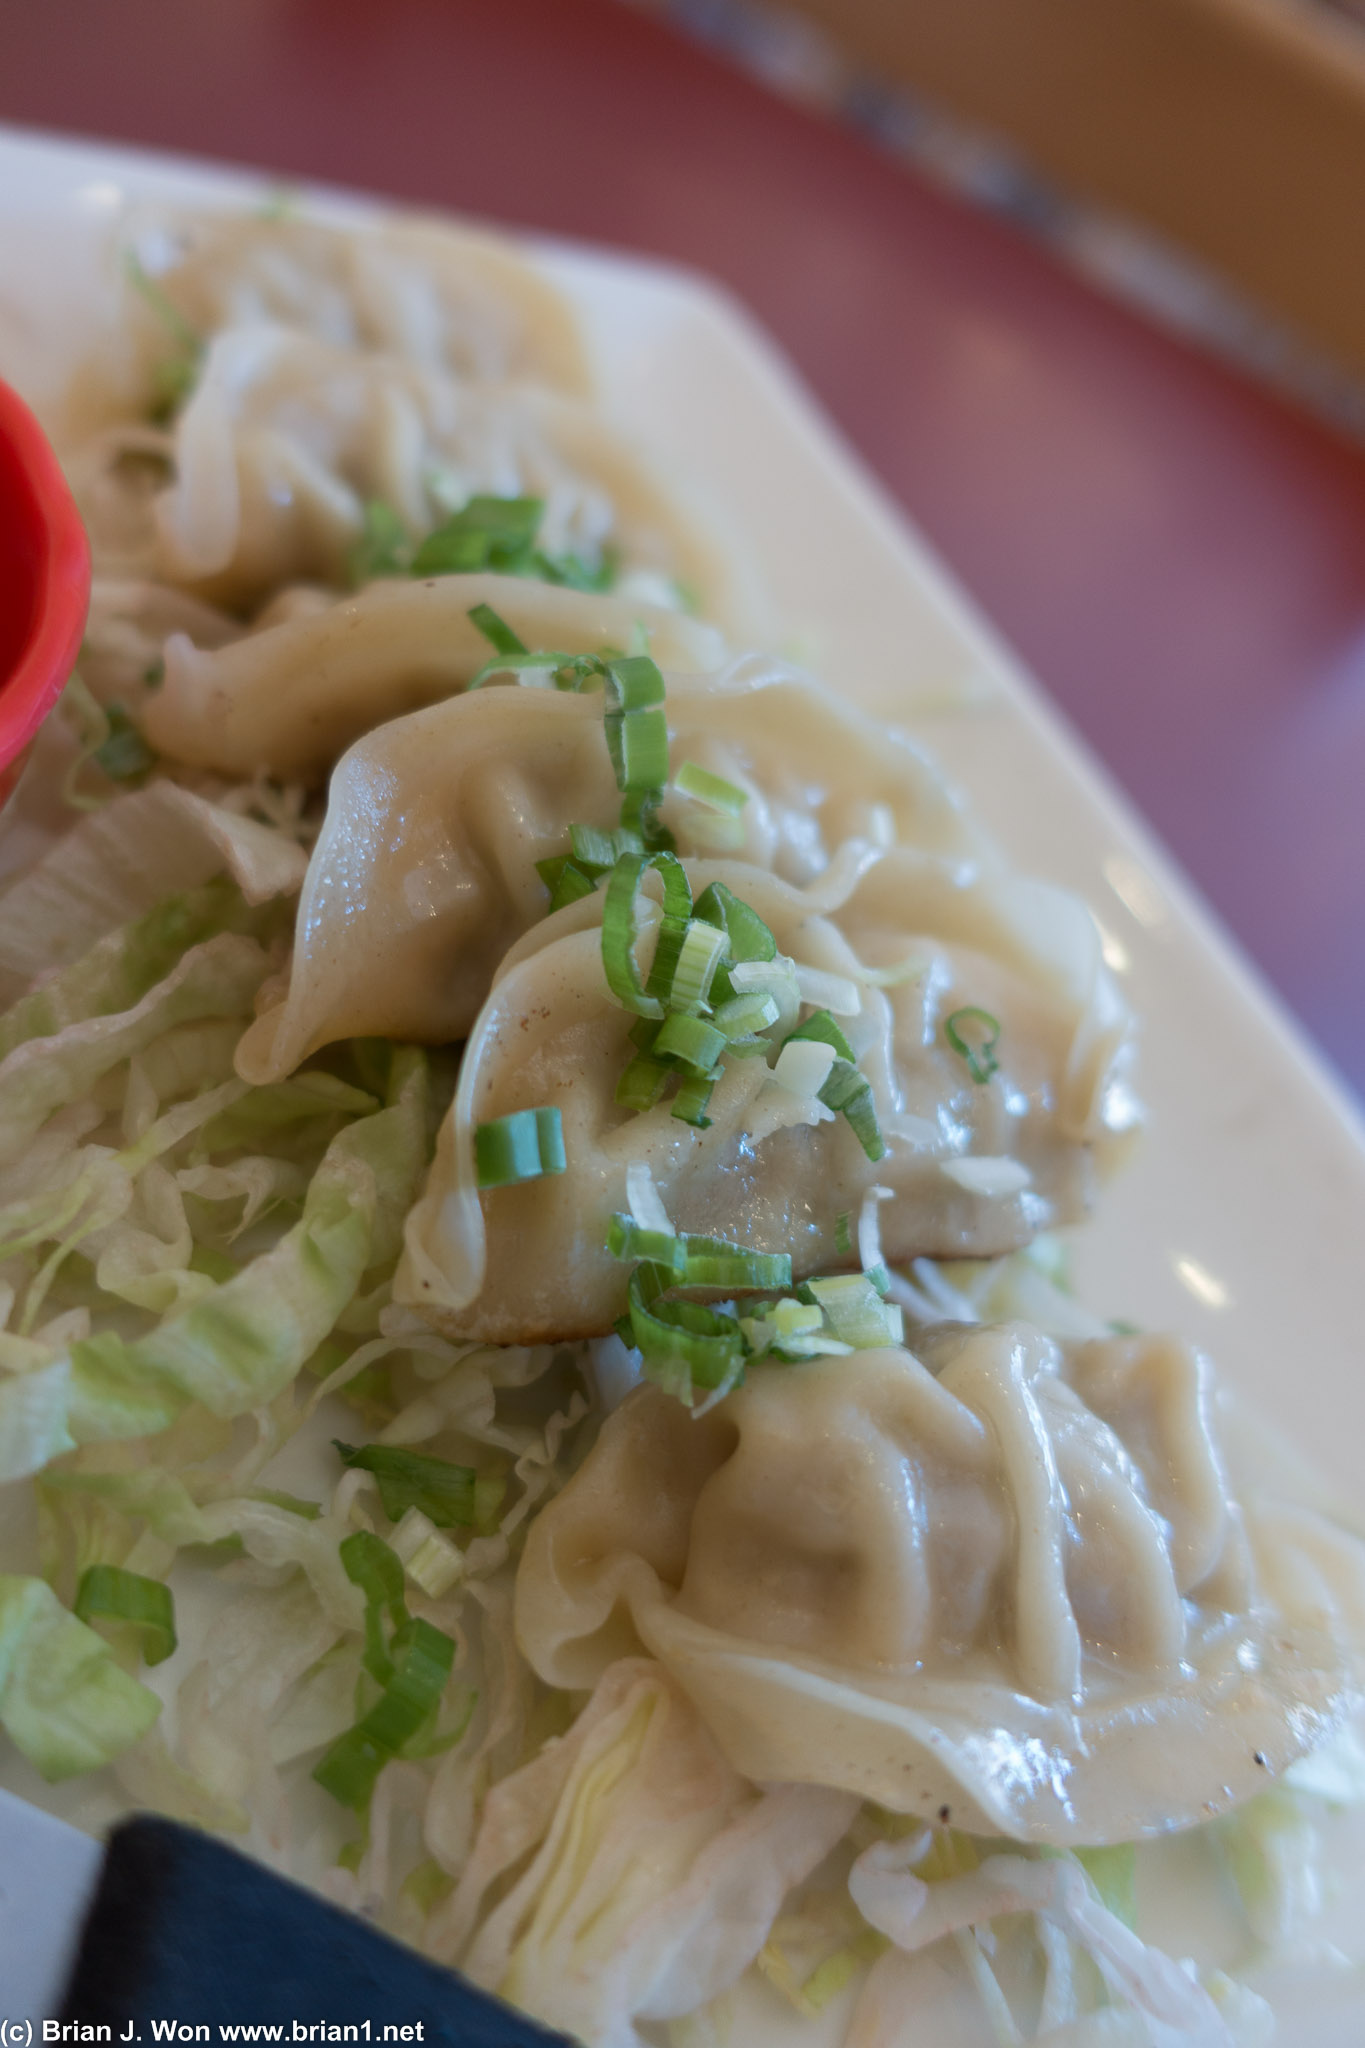 $6.95 for 6 smallish potstickers????